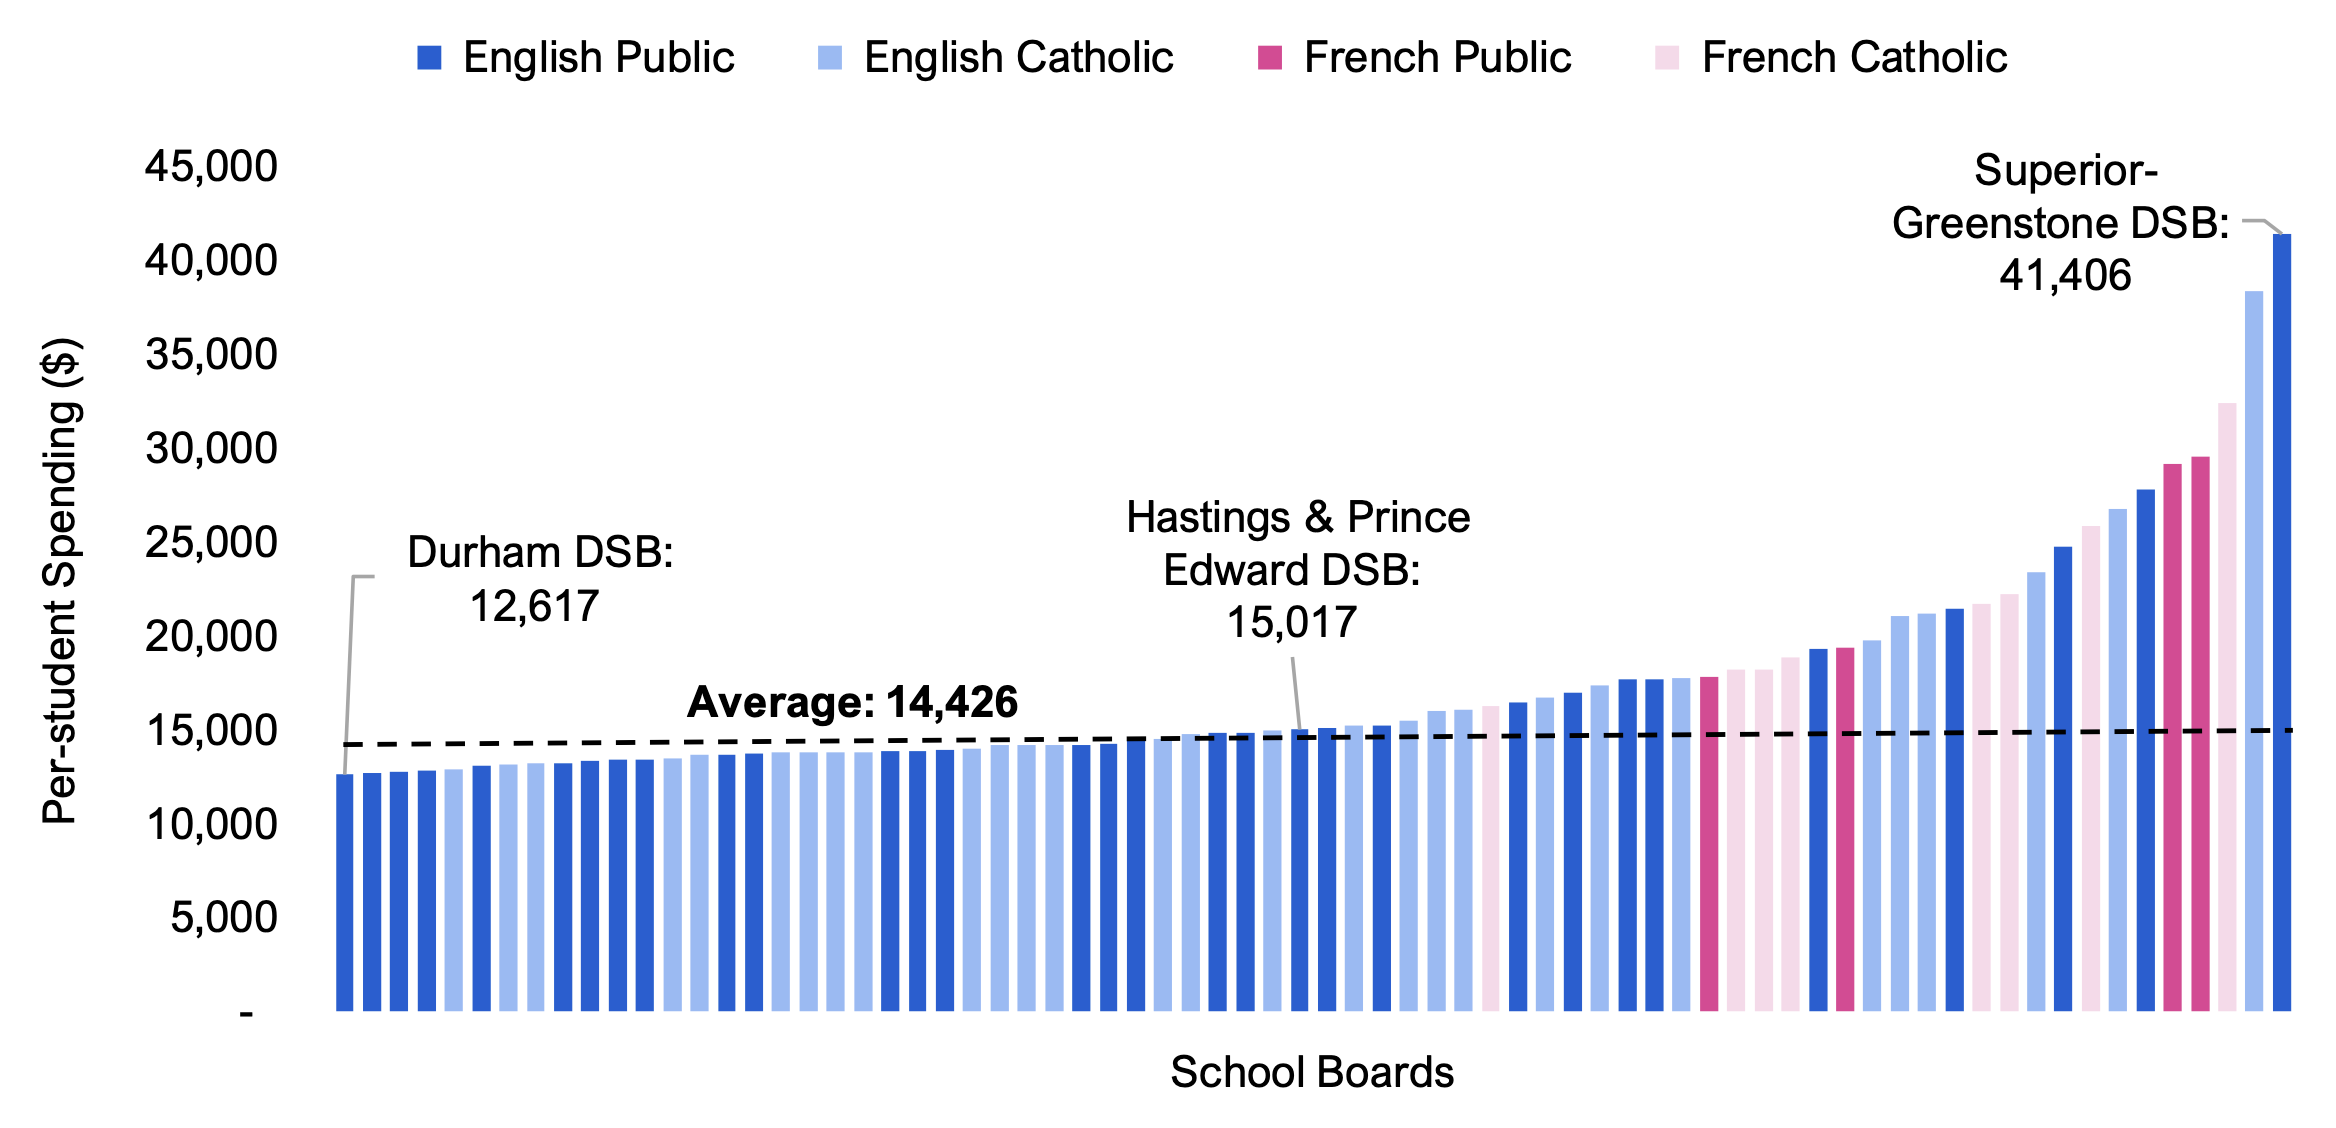 Figure 6.4 shows per-student spending by school board, broken down by school system. The values range from a low of $12,617 for the Durham DSB to a high of $41,406 for the Superior-Greenstone DSB, with an overall average of $14,426. On average, the French Catholic and French Public system schools have higher spending per-student than the English Public and English Catholic system schools.